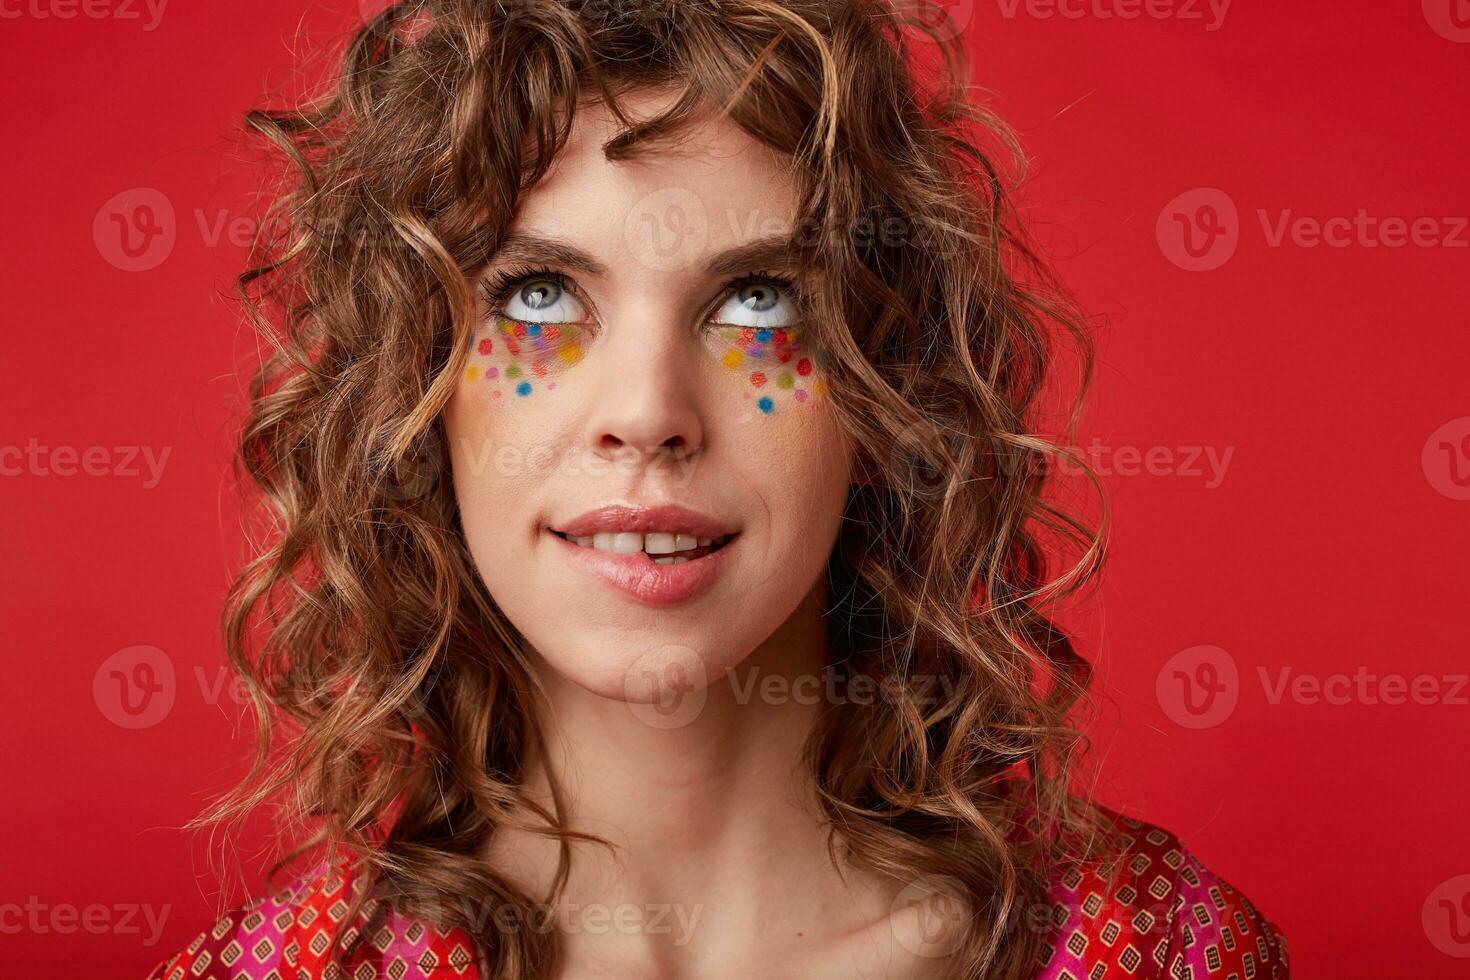 Portrait of young attractive curly woman with multicolored dots on her face looking upwards thoughtfully and biting underlip, wearing motley patterned top while posing over red background photo